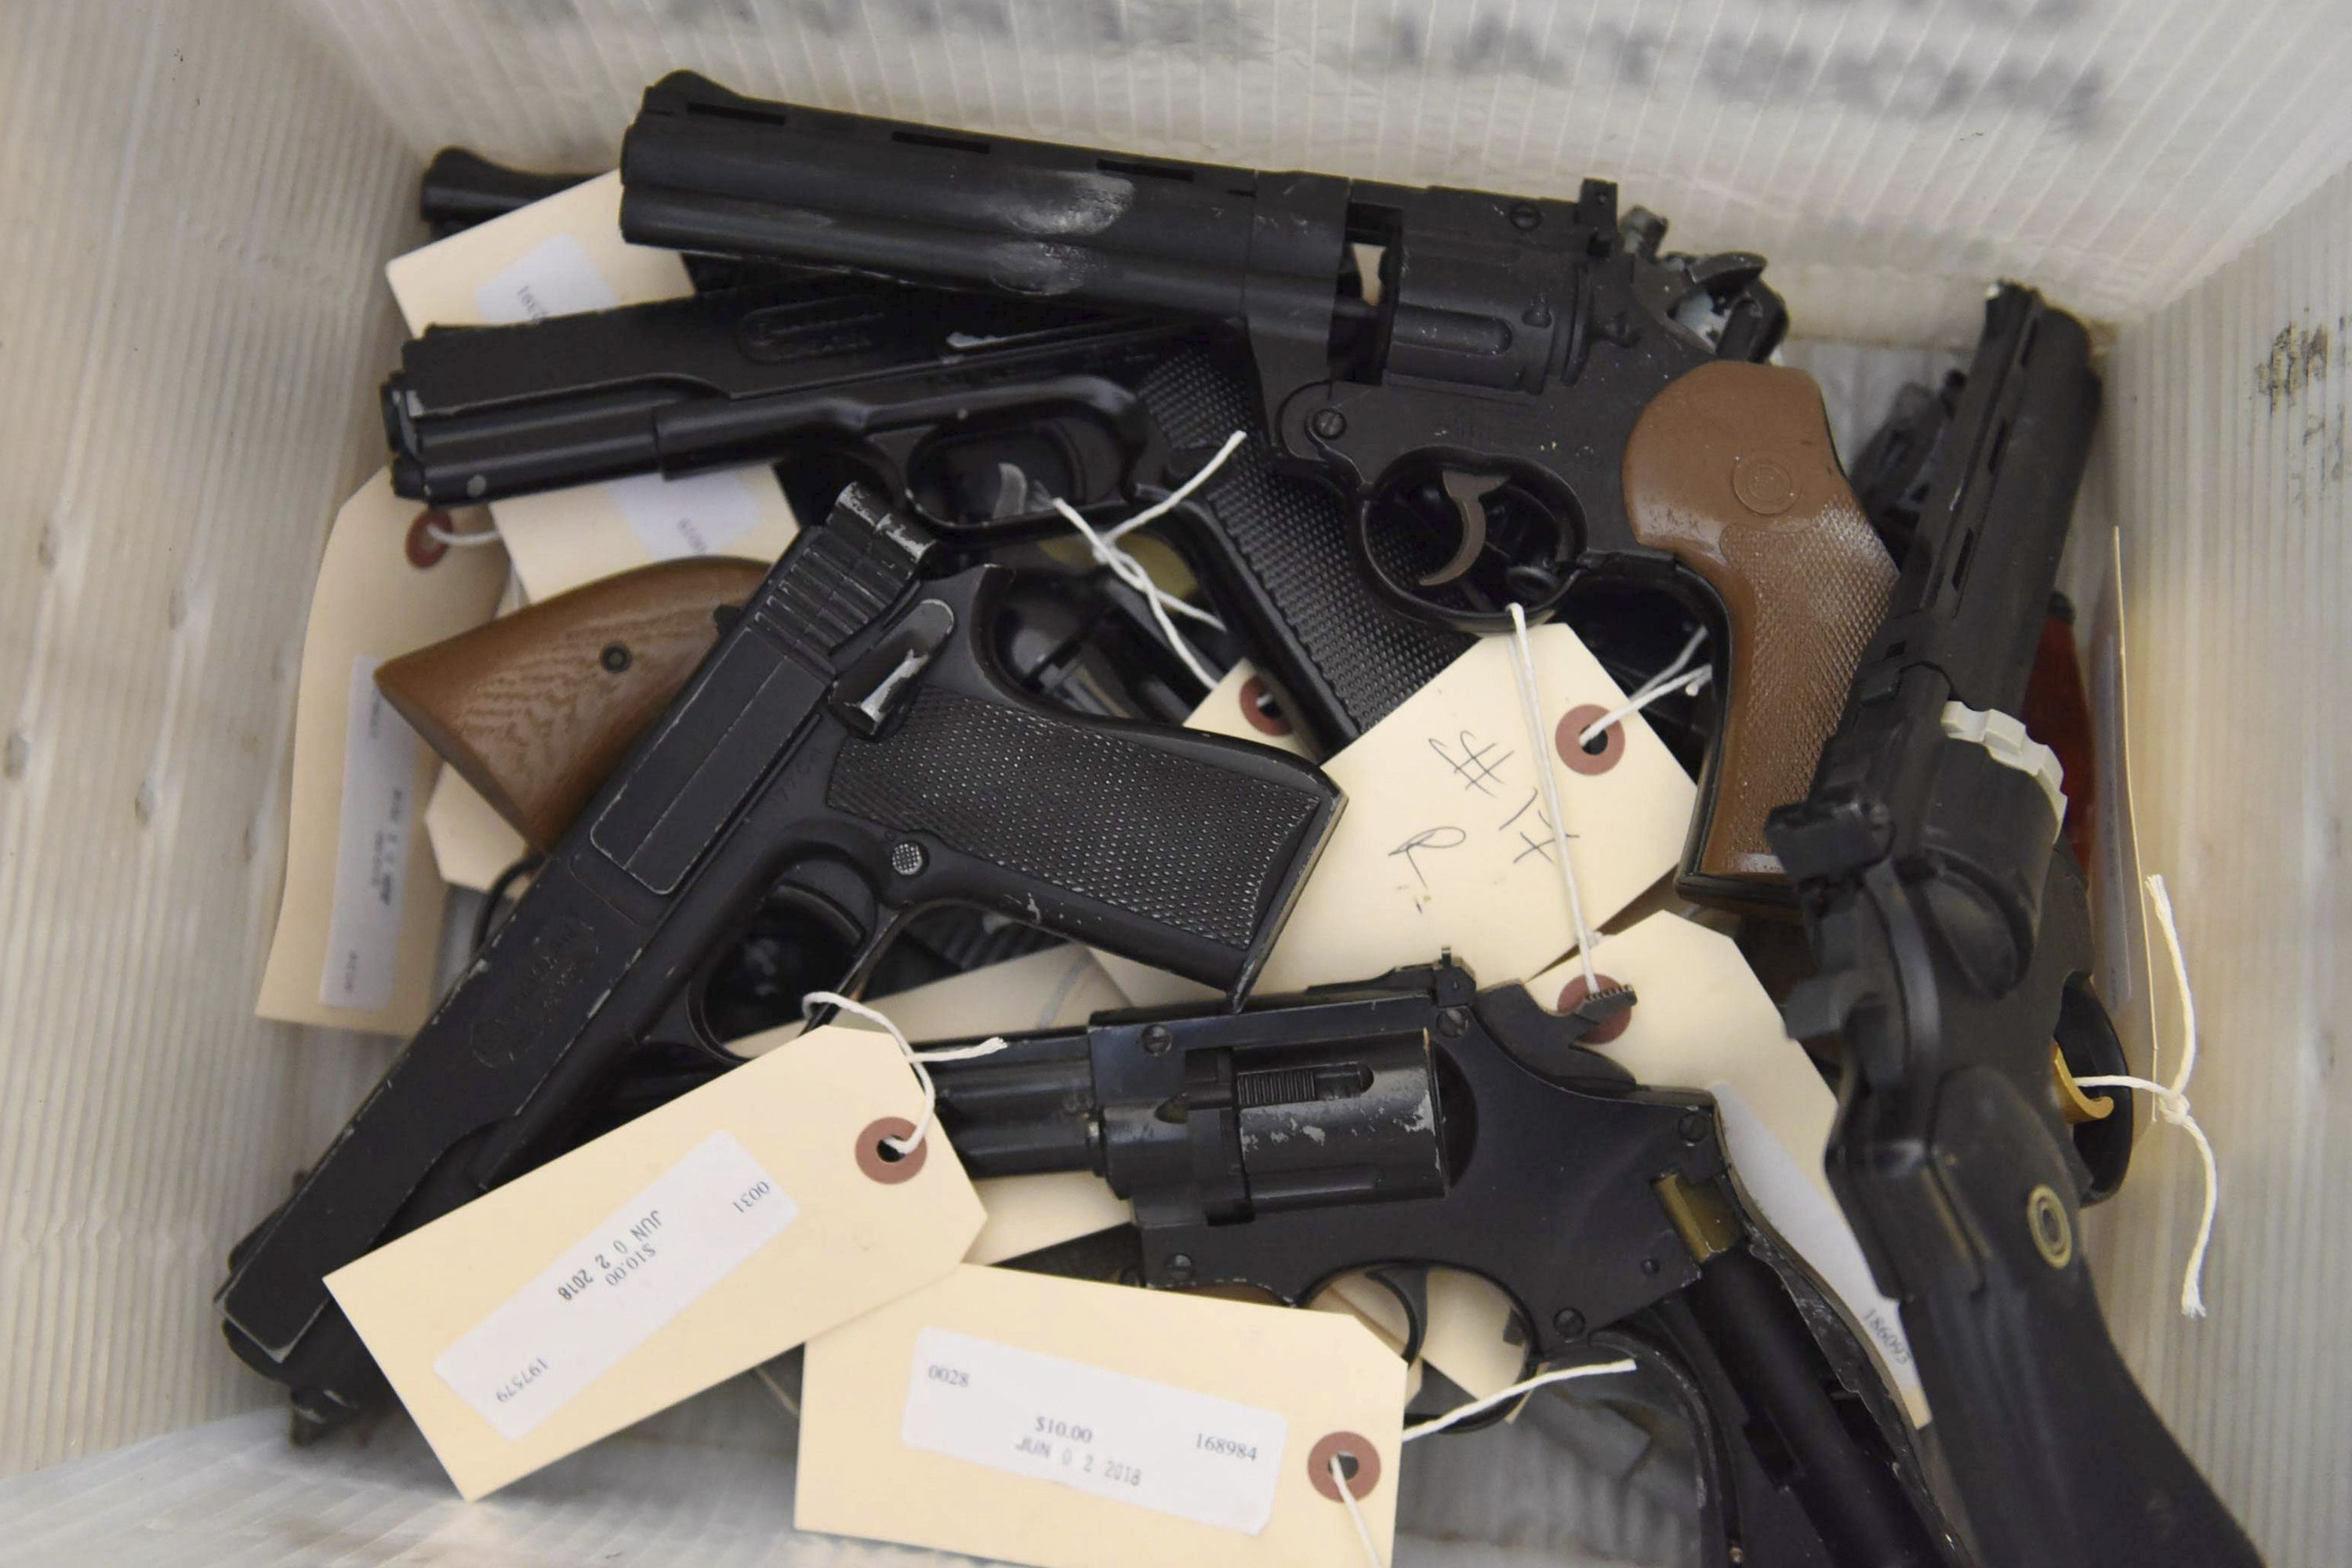 How to Dispose of Unwanted Firearms Legally?